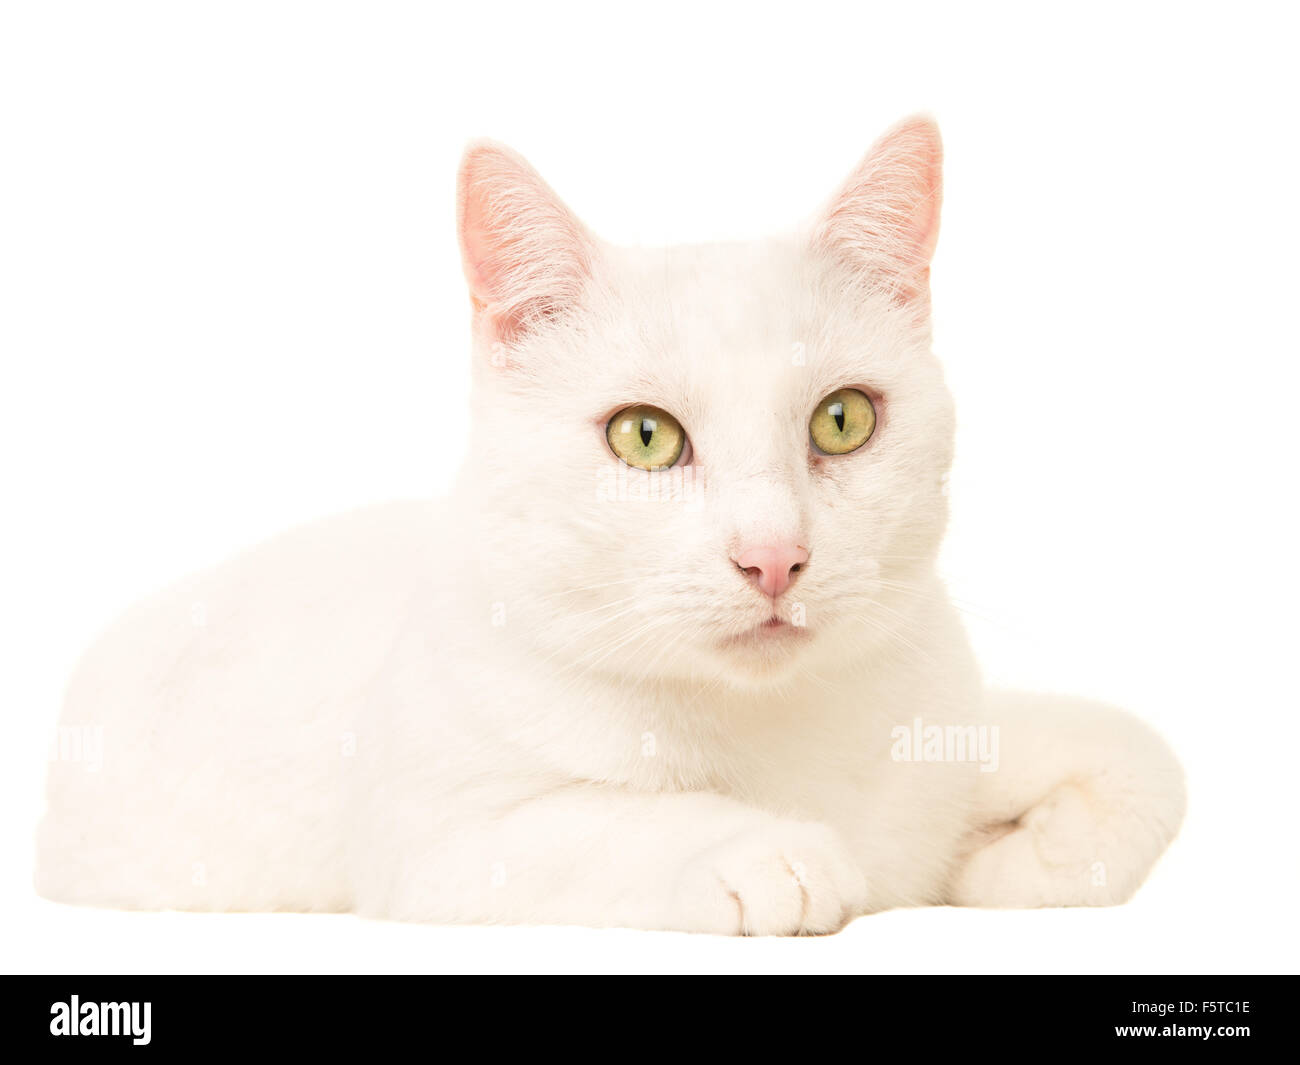 Lying down white cat isolated on a white background Stock Photo